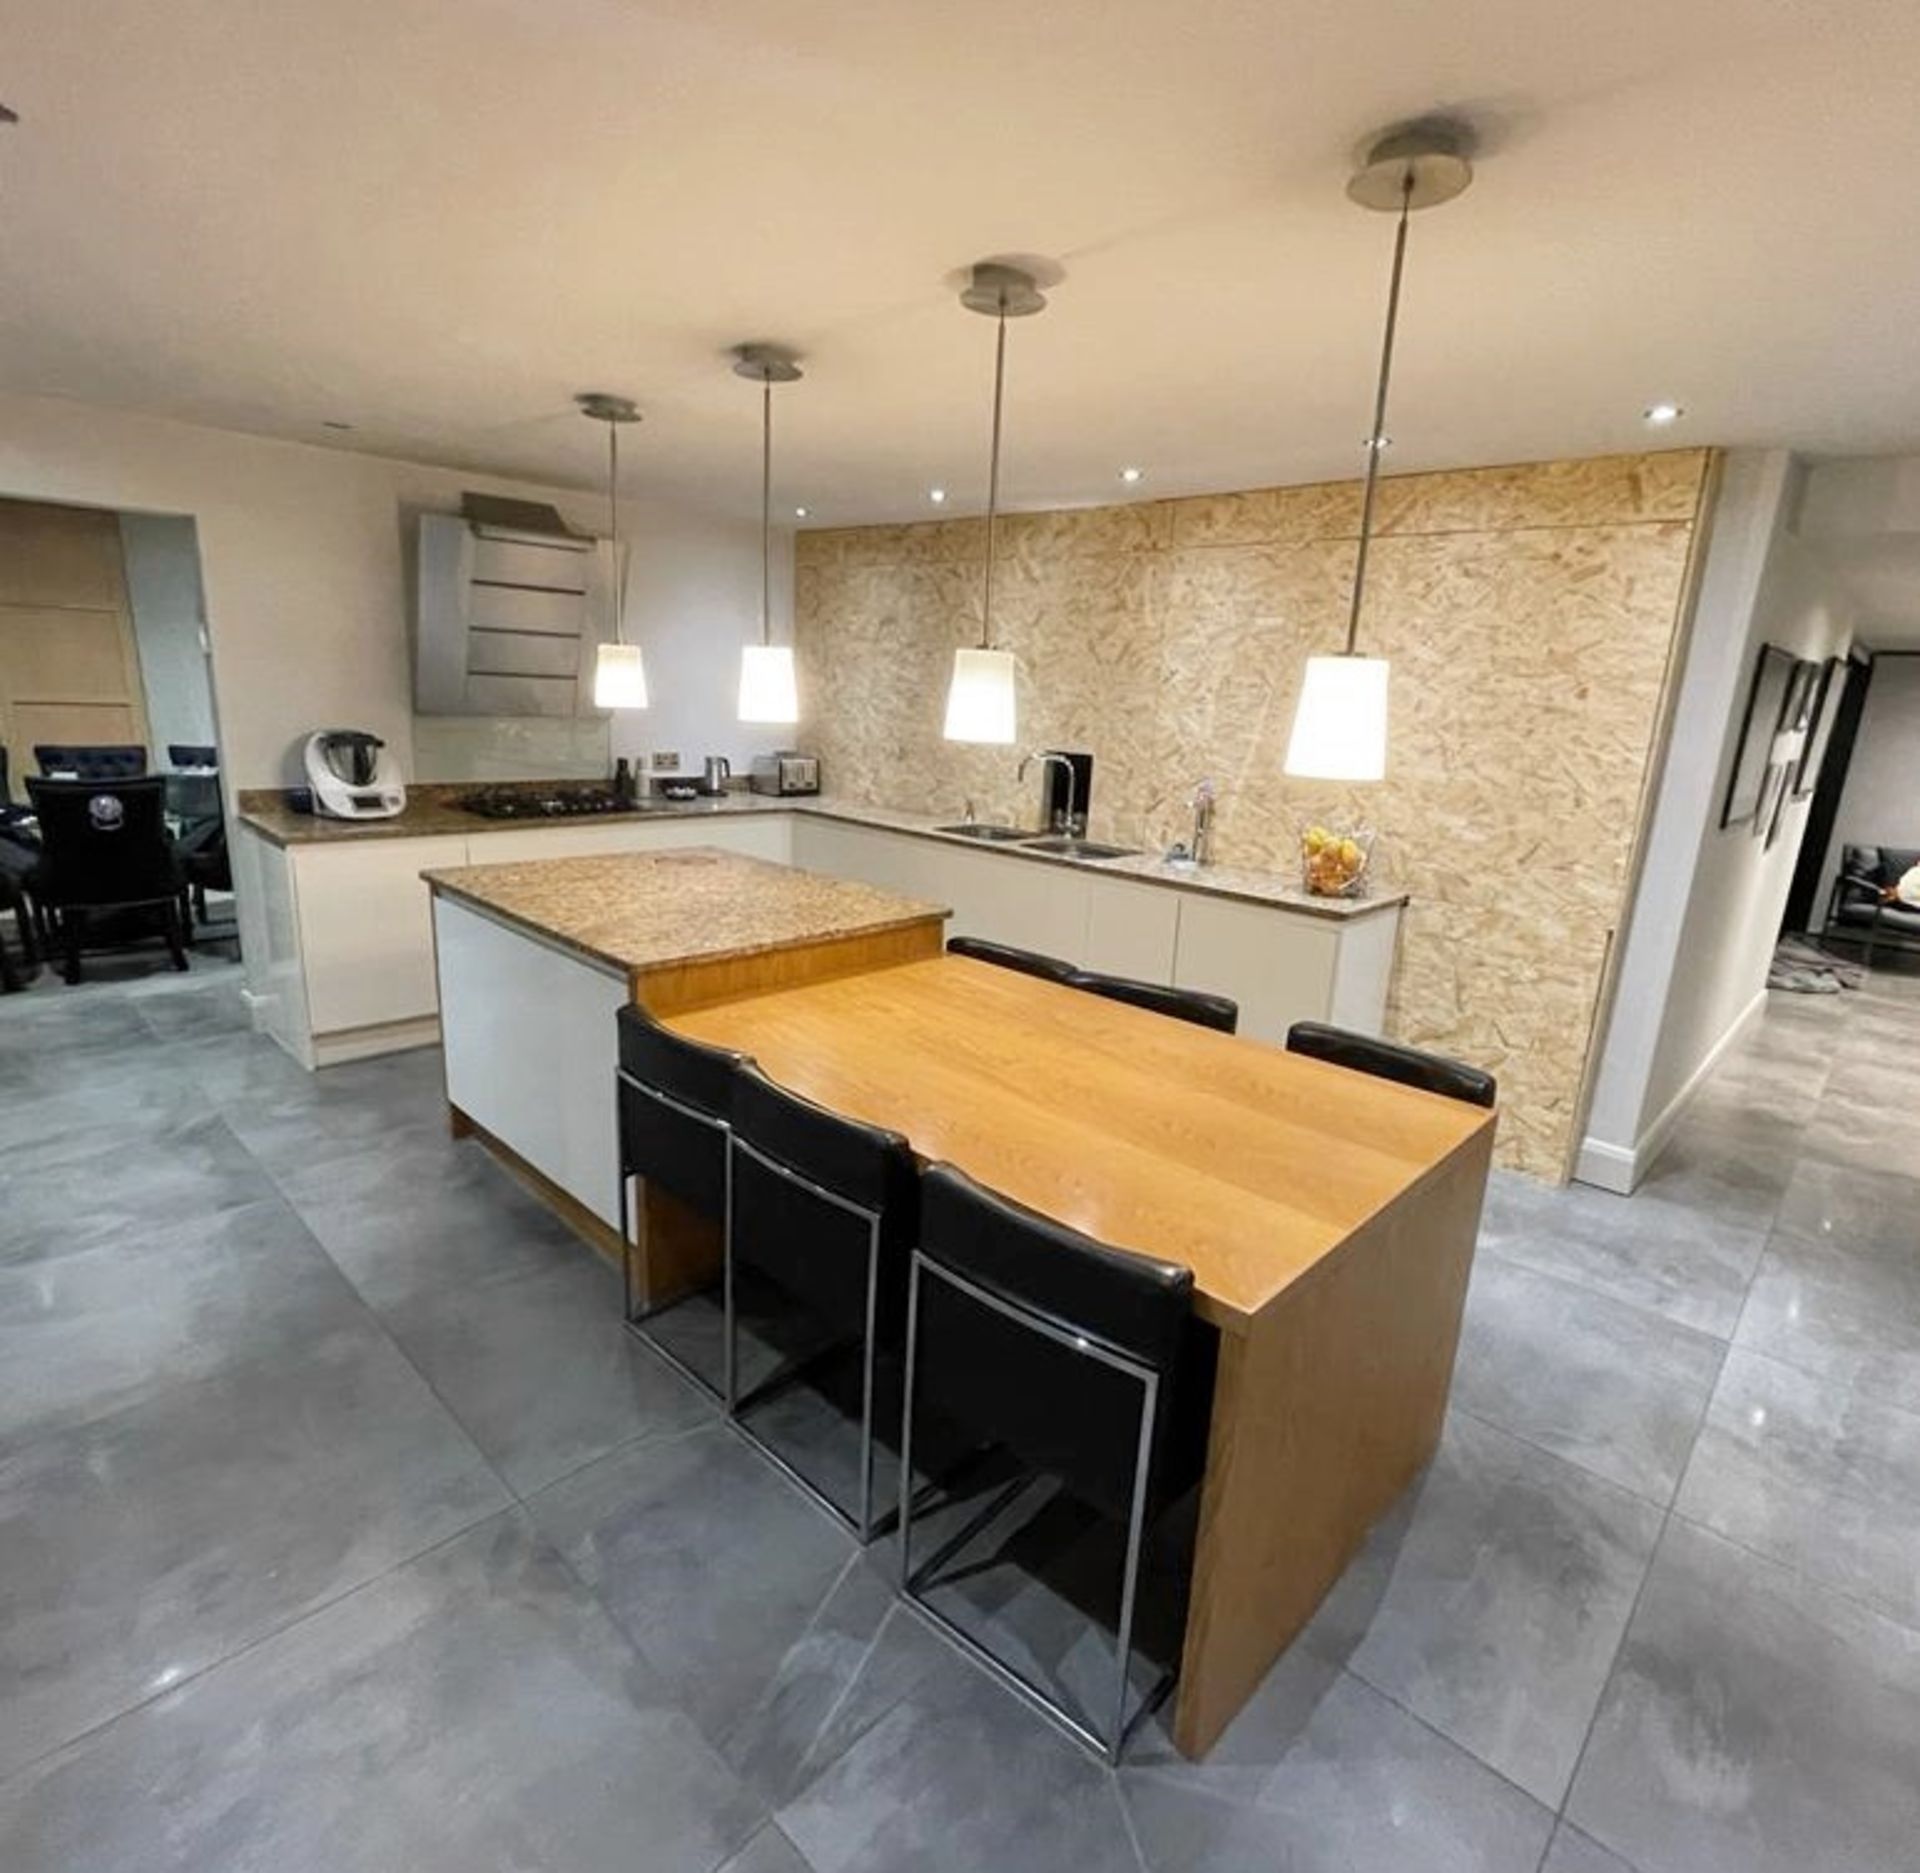 1 x Stunning PARAPAN Handleless Fitted Kitchen with Neff Appliances, Granite Worktops & Island - Image 11 of 126